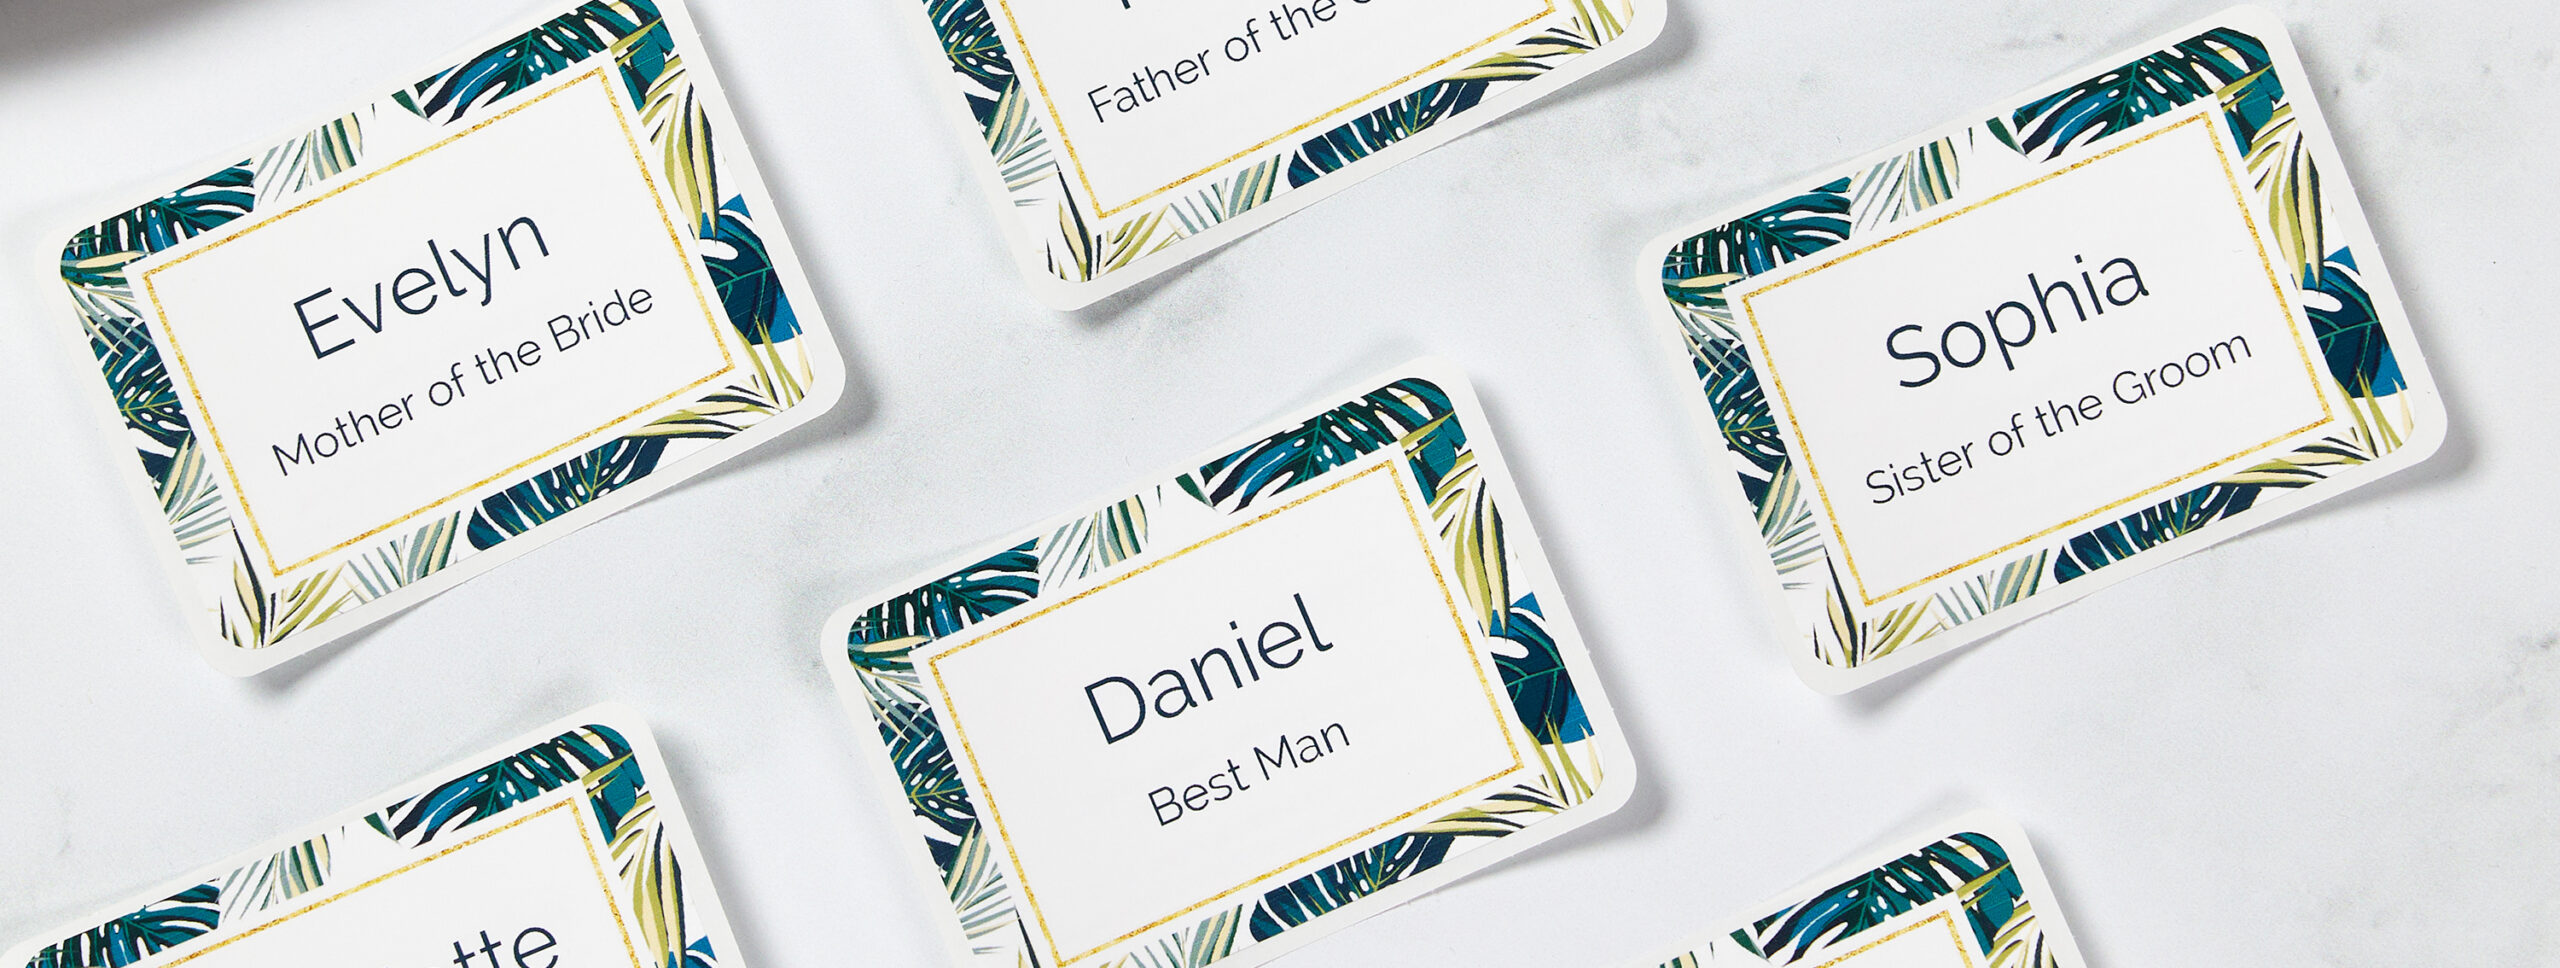 21 Awesome Name Tag Ideas to Boost Your Next Event - Avery